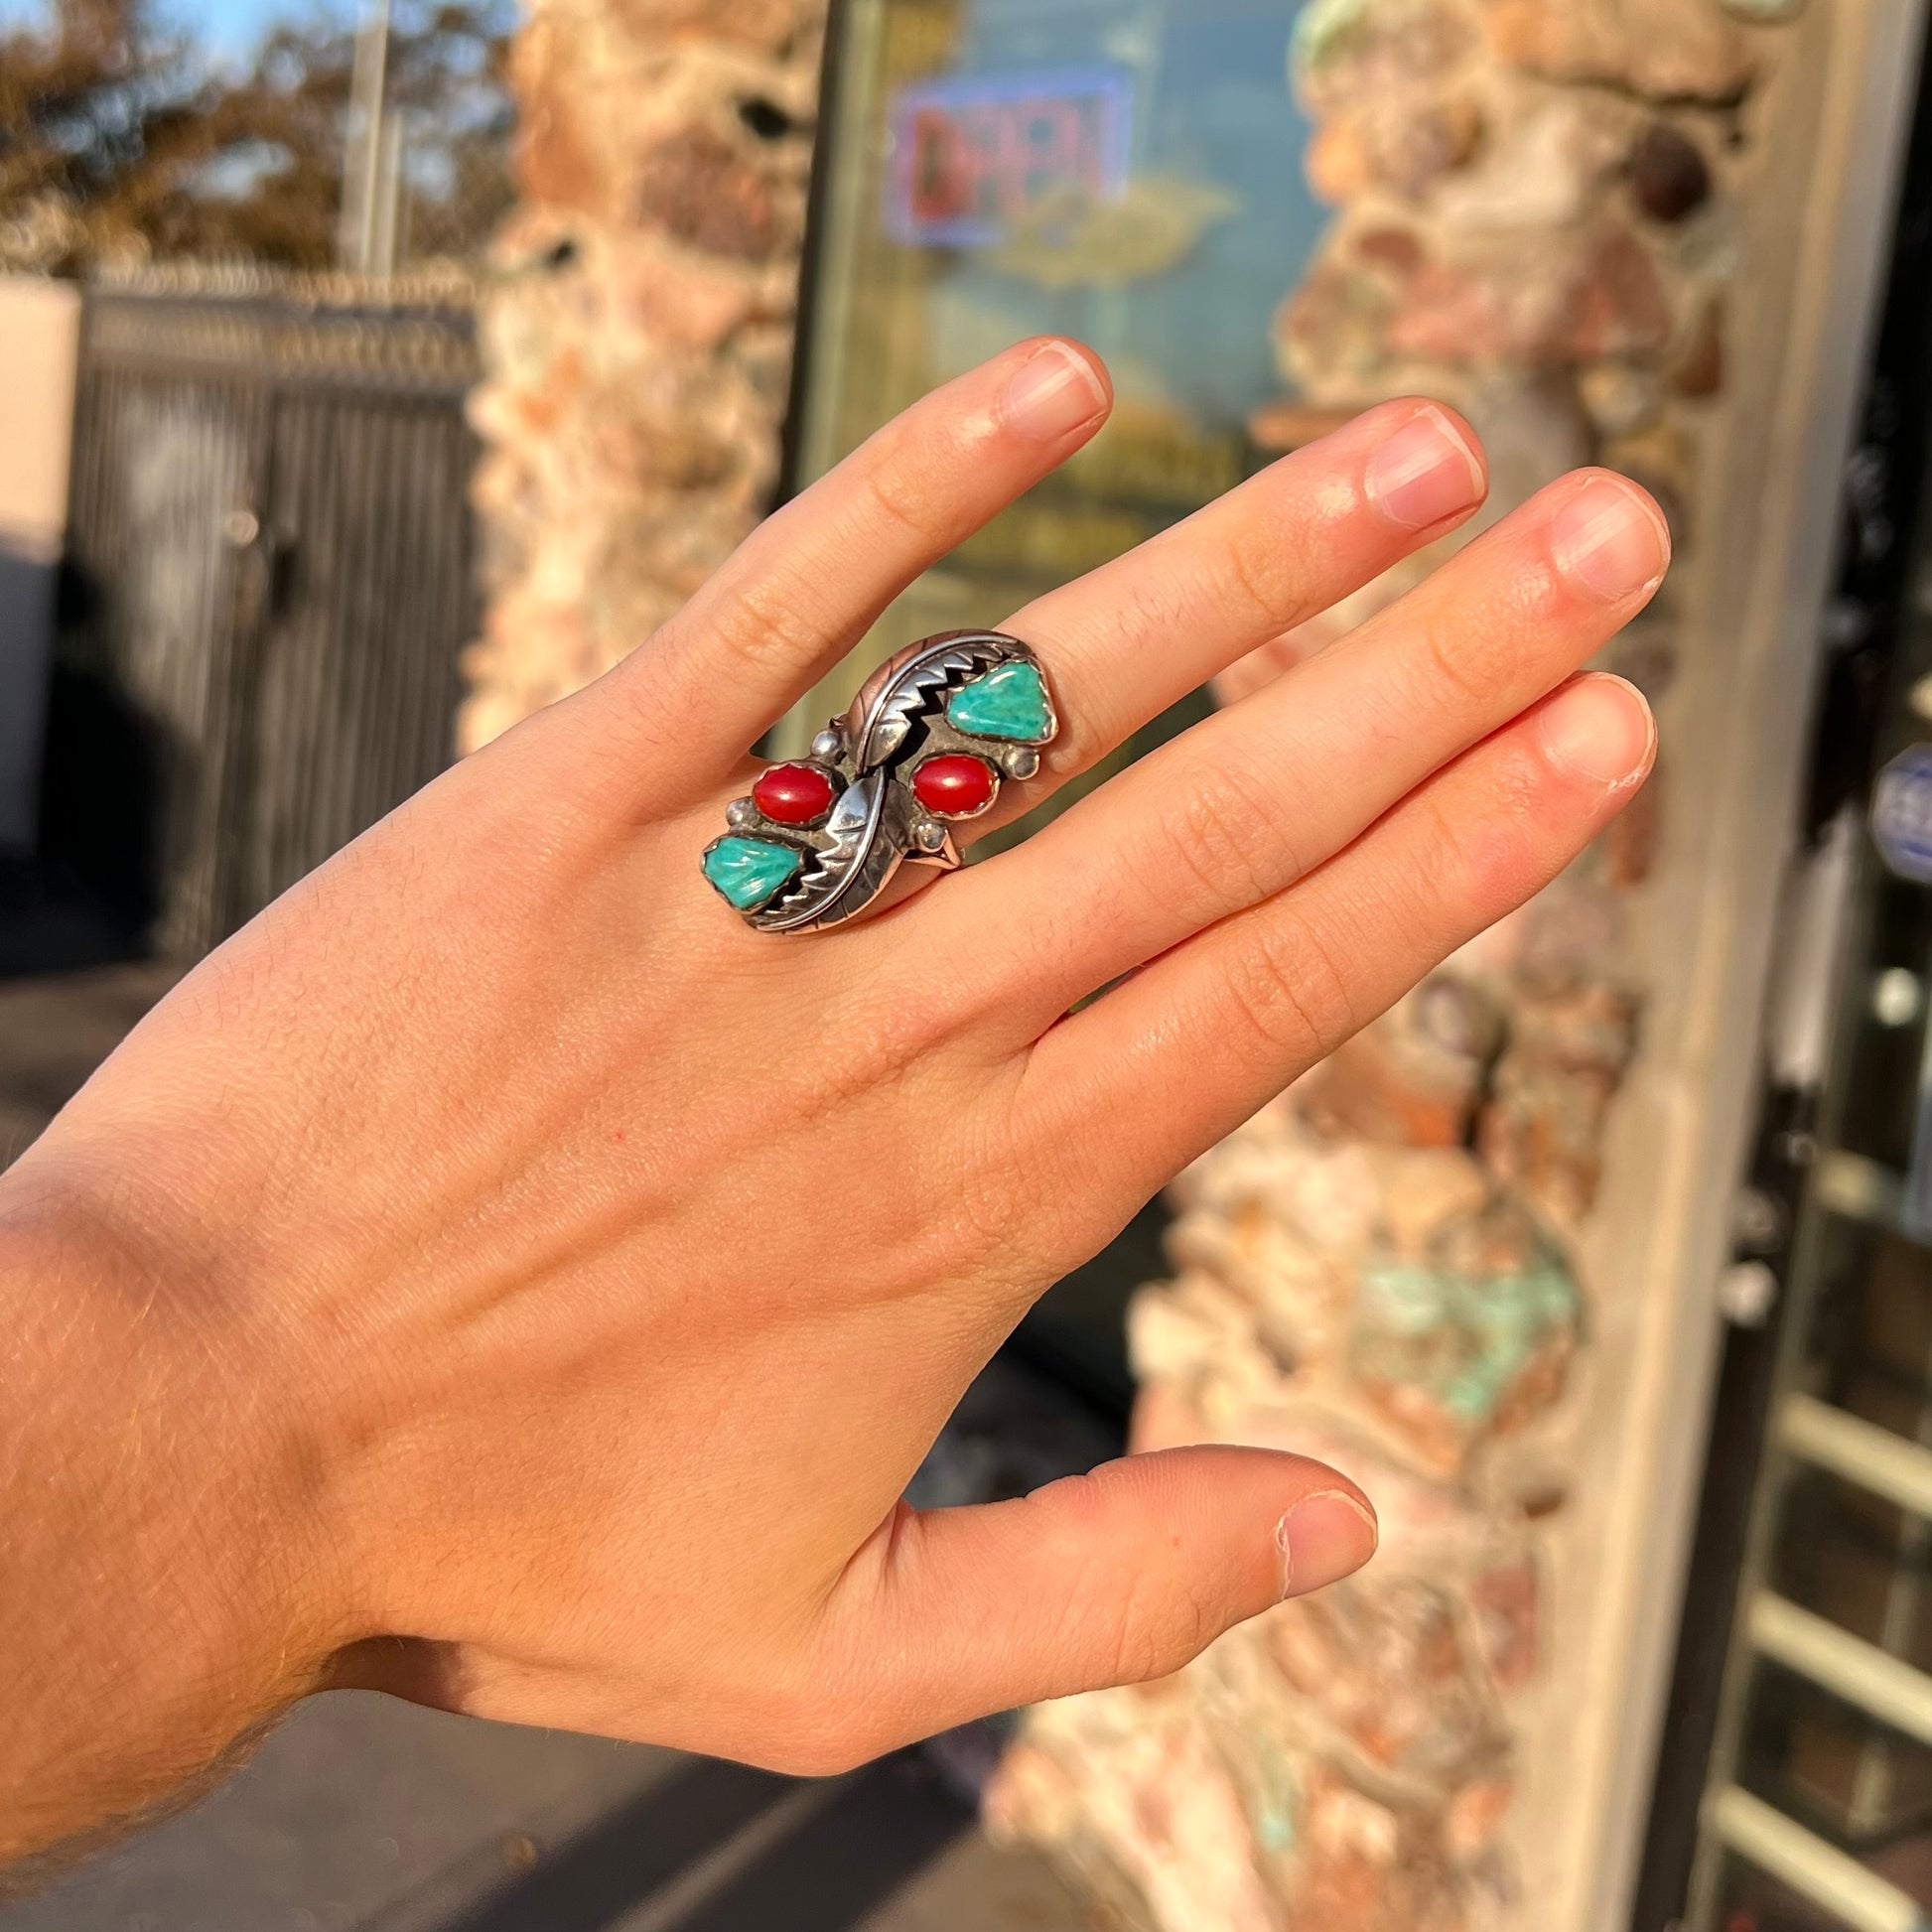 Vintage Hopi Indian turquoise and coral ring handmade in sterling silver by artist Miriam Chuyate.